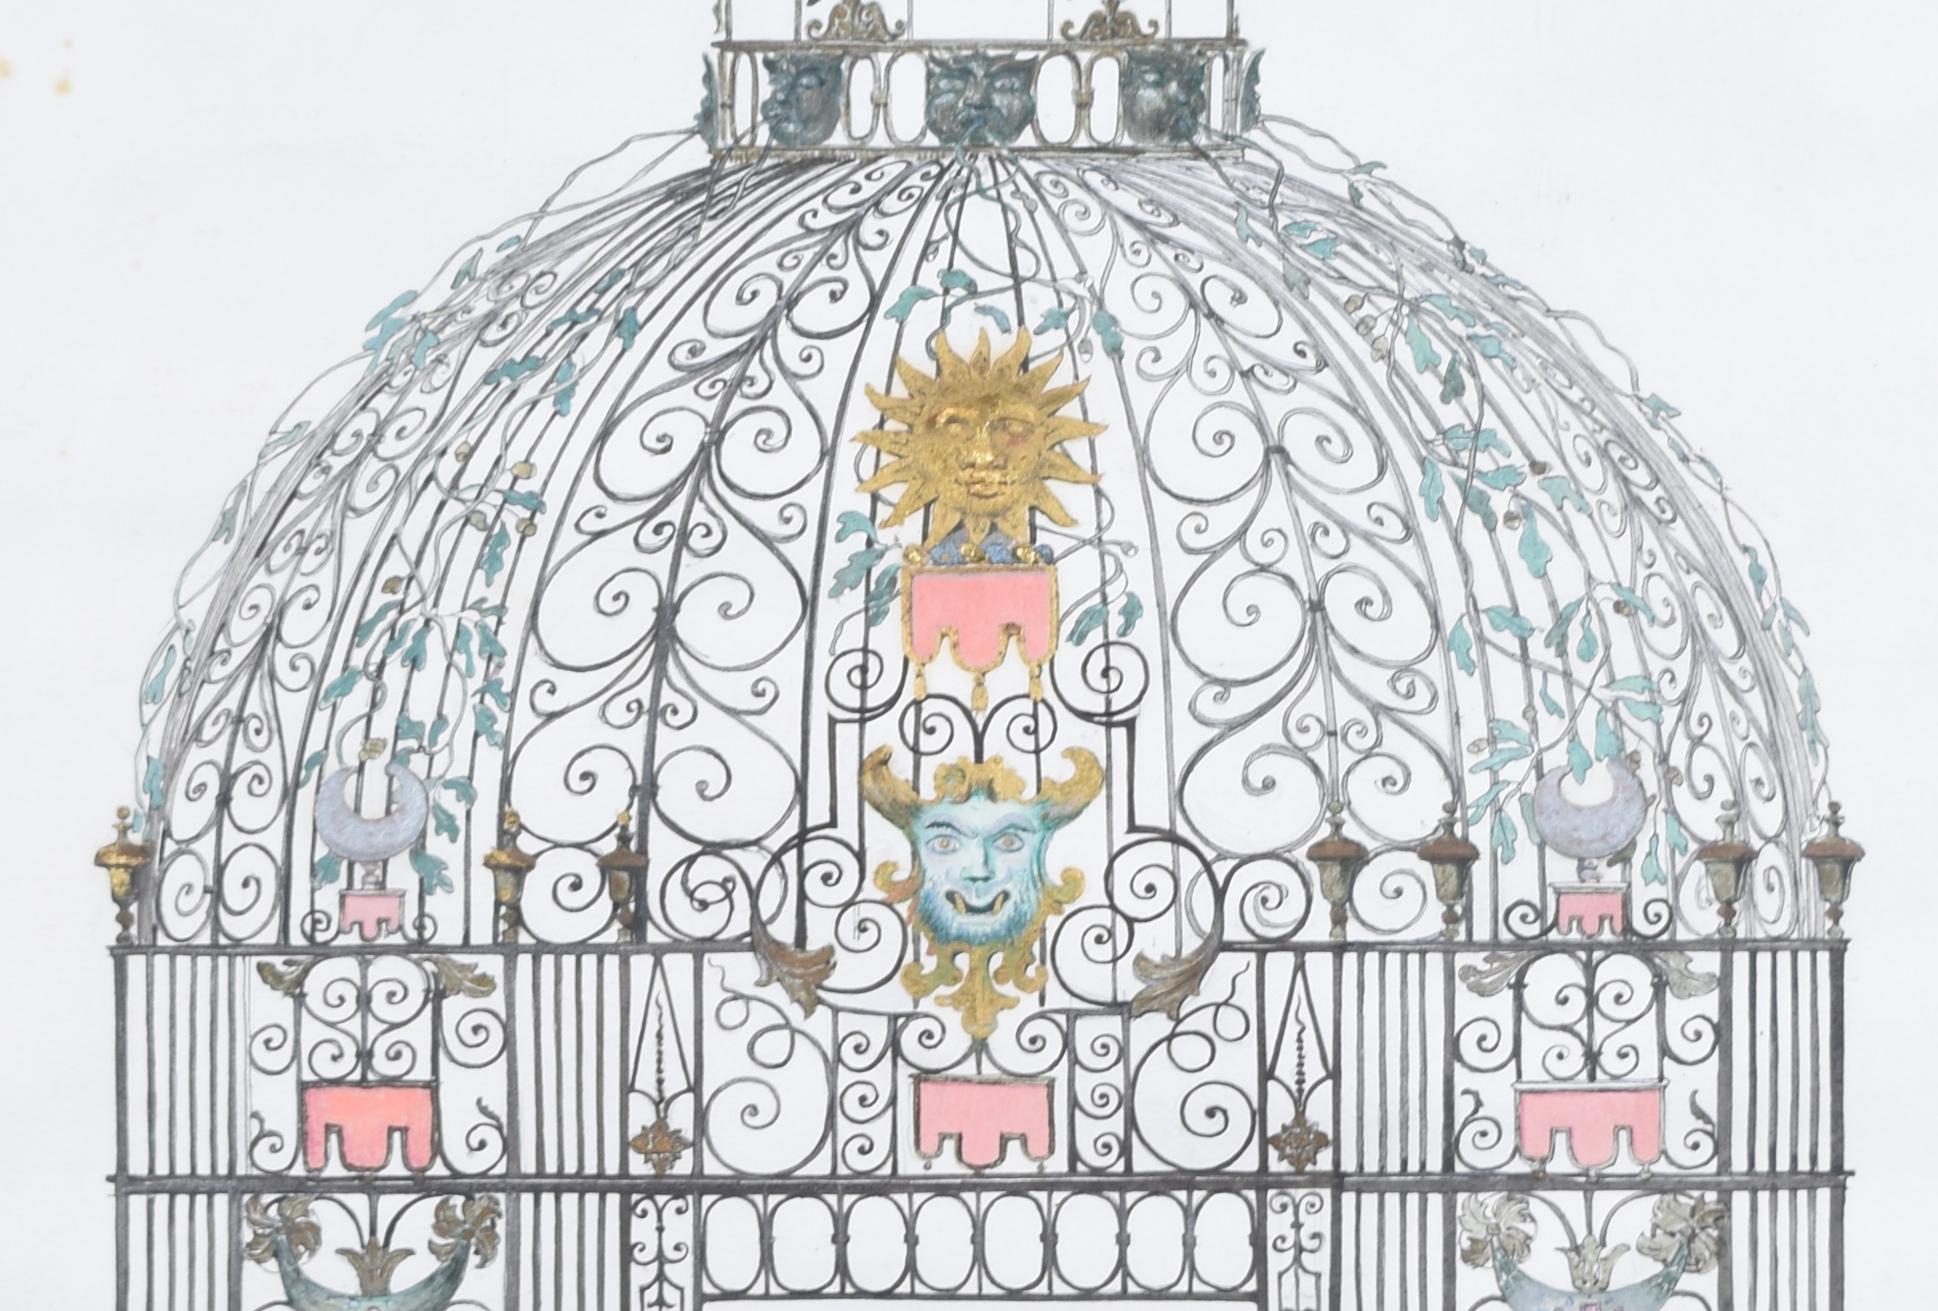 Design for 'Bird Cage' Arbour, Melbourne Hall, Derbyshire by Louis Osman FRIBA For Sale 2